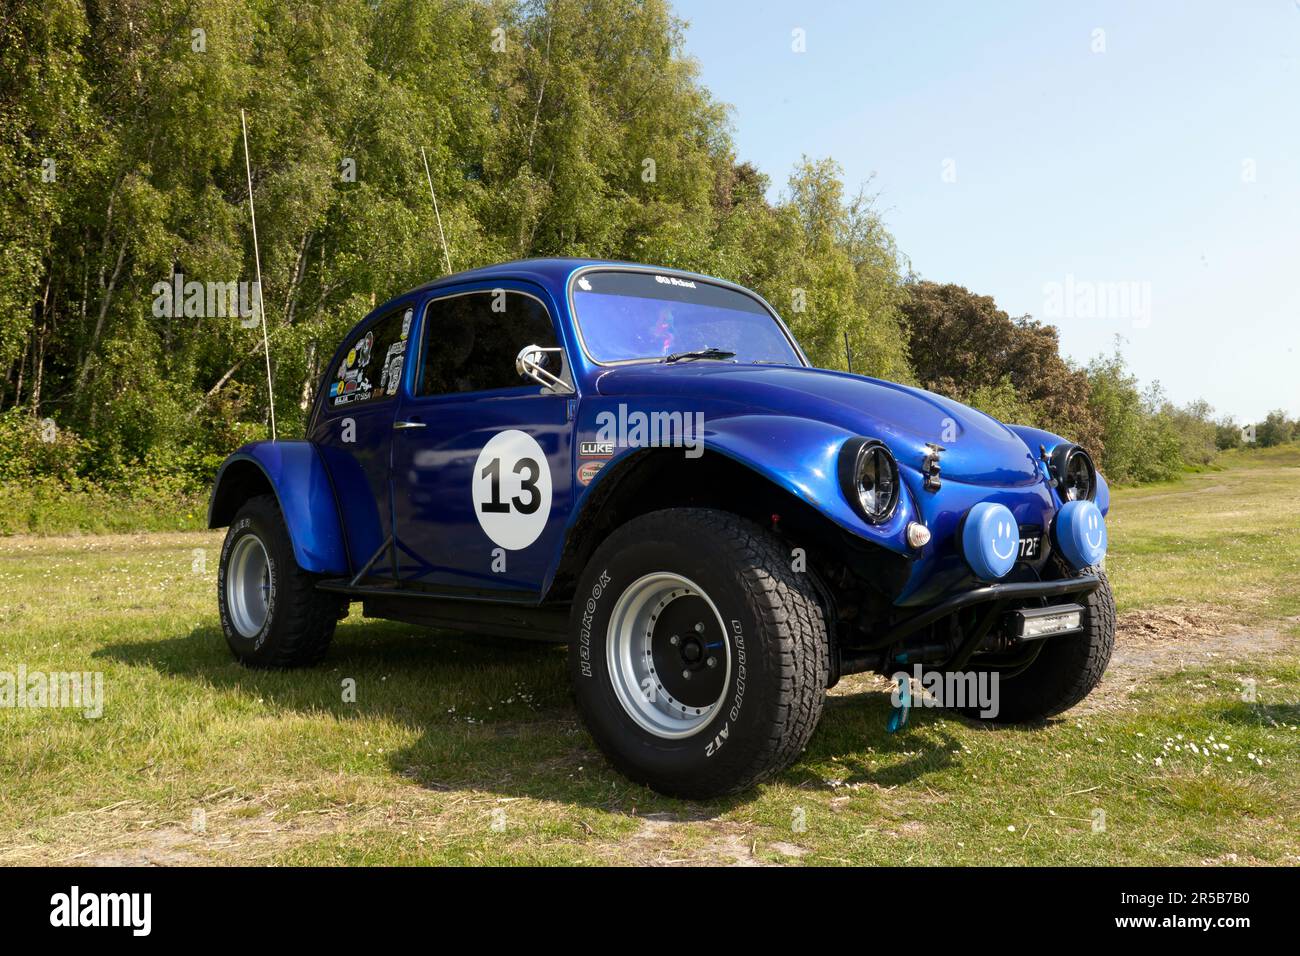 Three-quarters front view of a Blue, 1967, Volkswagen Beetle Beach Buggy, on display at the 2023 Deal Classic Care Show Stock Photo